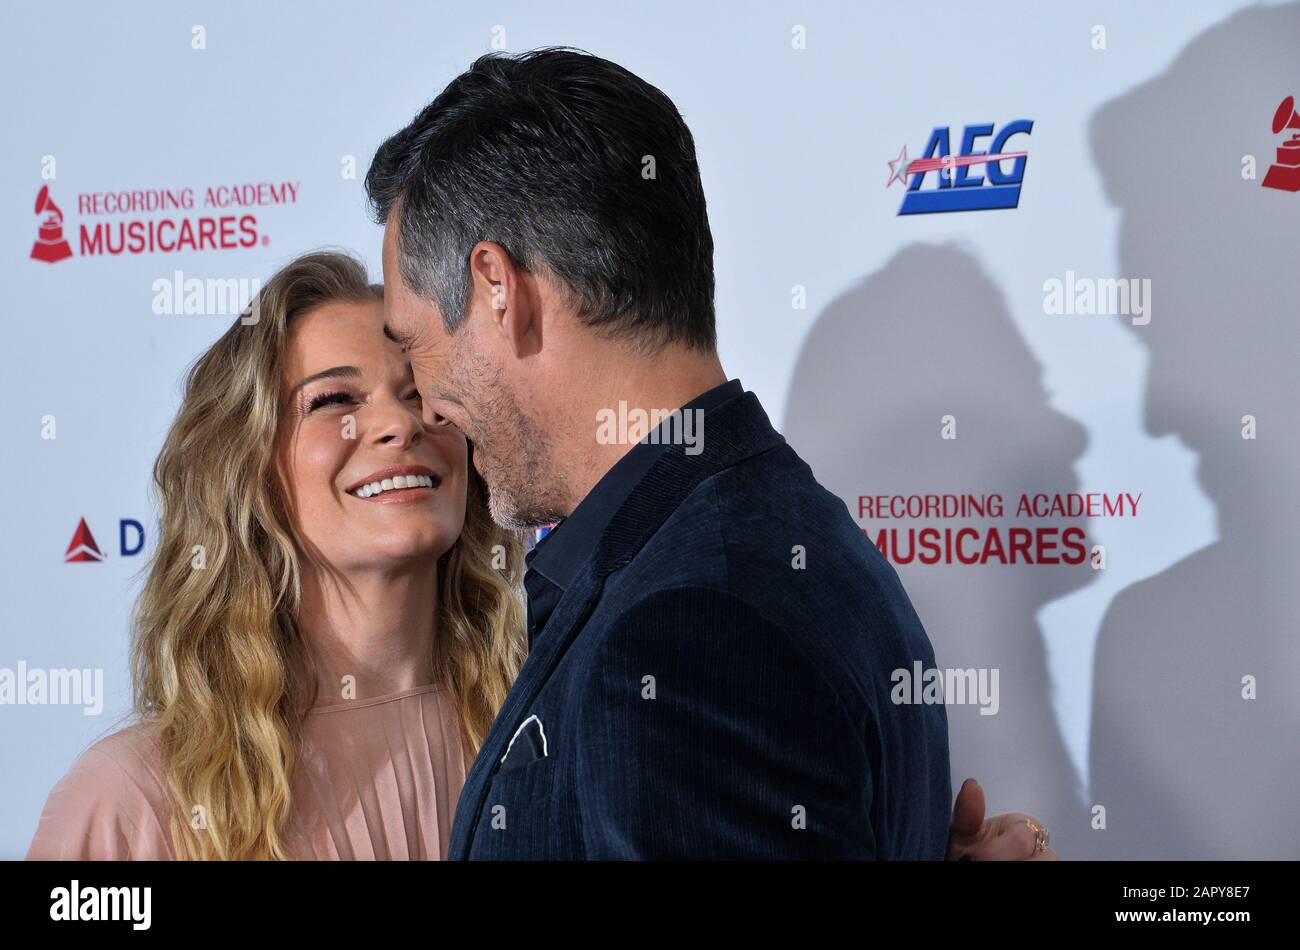 Los Angeles, USA. 25th Jan, 2020. LeAnn Rimes and Eddie Cibrian arrive for the MusiCares Person of the Year gala honoring Aerosmith at the Los Angeles Convention Center in Los Angeles on Friday, January 24, 2020. Photo by Jim Ruymen/UPI Credit: UPI/Alamy Live News Stock Photo